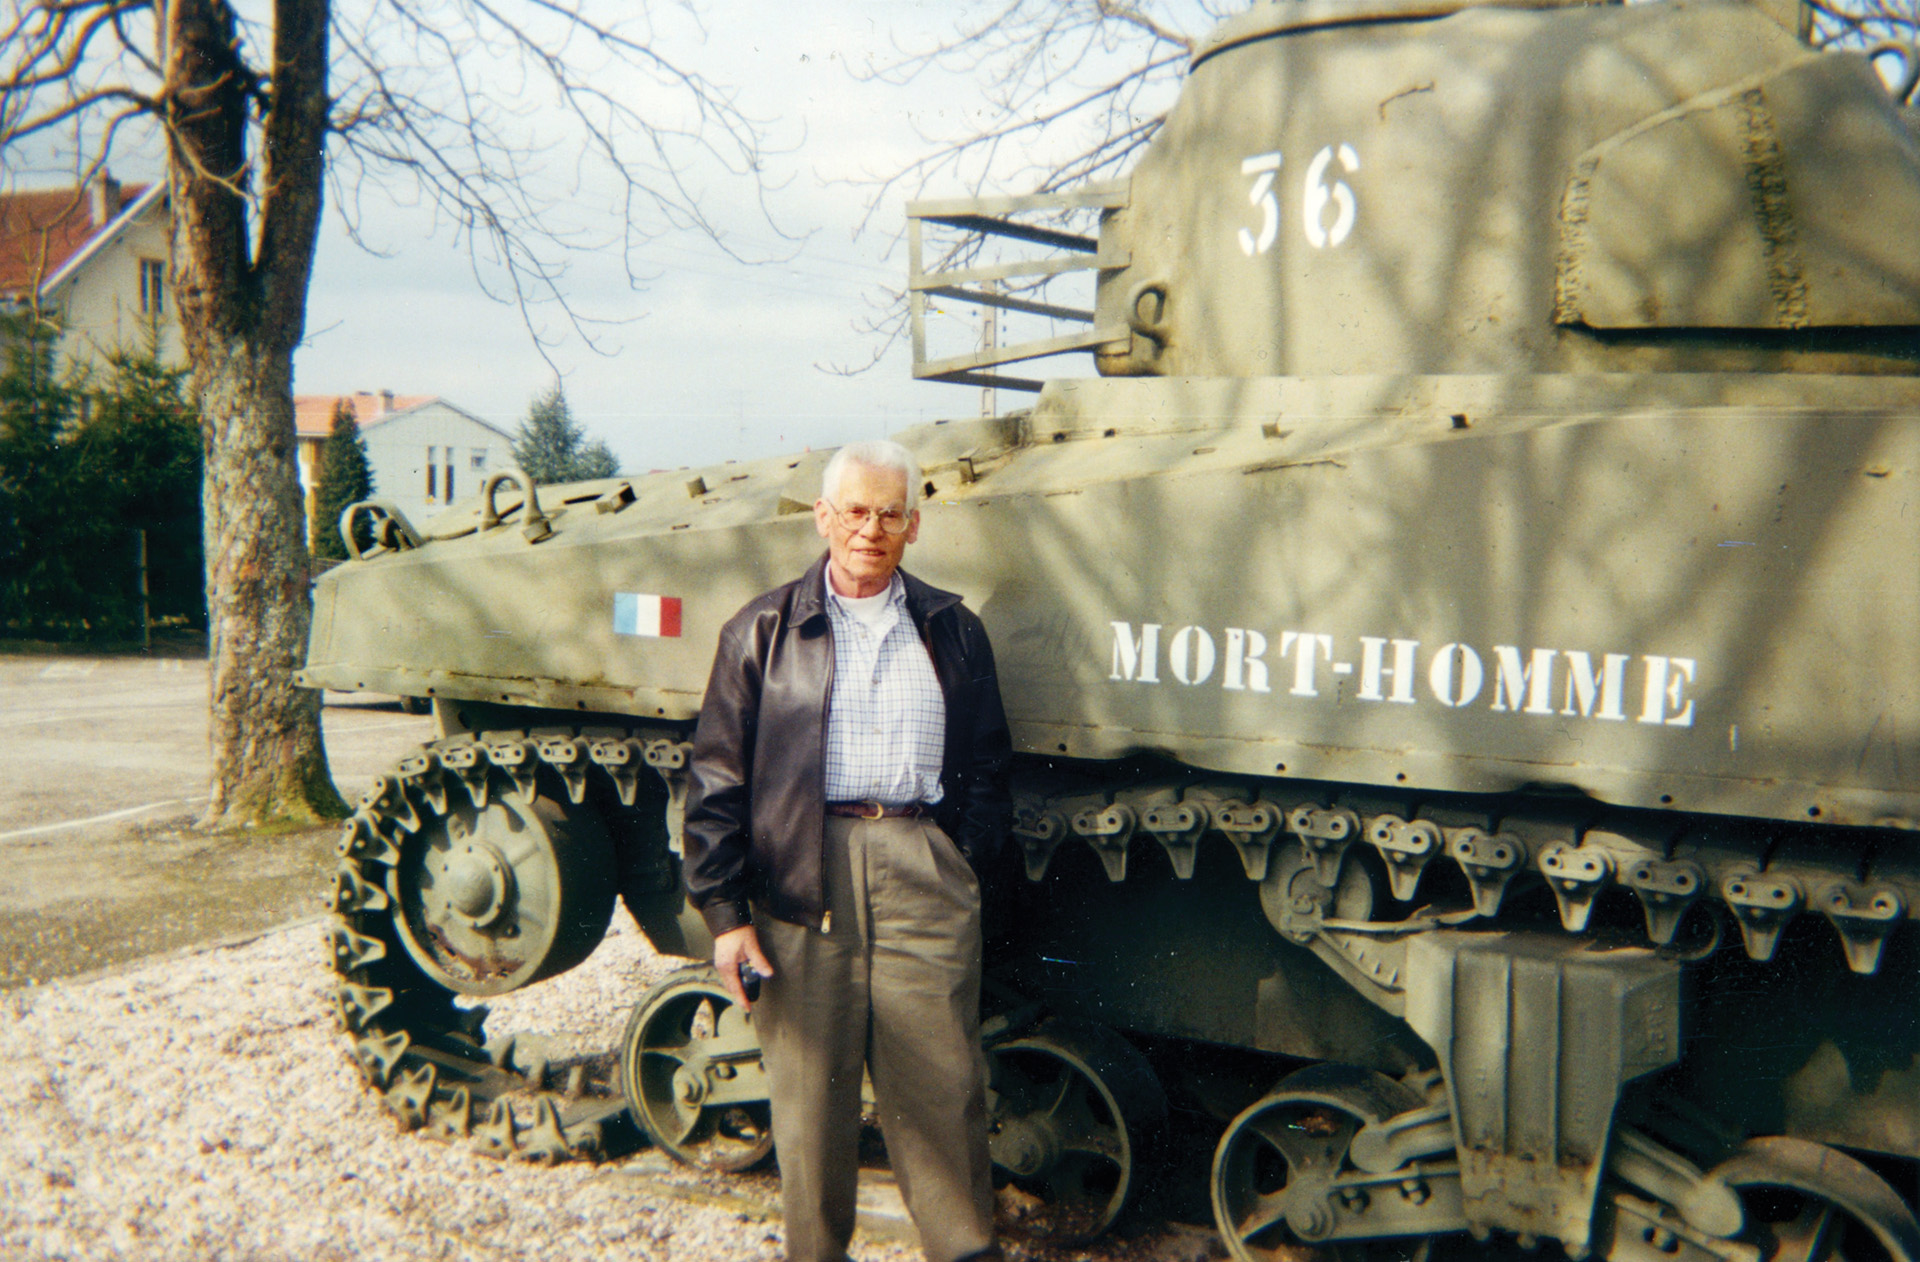 In 1994, on the 50th anniversary of the battle and liberation of the village of Badonviller, Rene poses with Mort-Homme III that today stands as a memorial in the town square. 